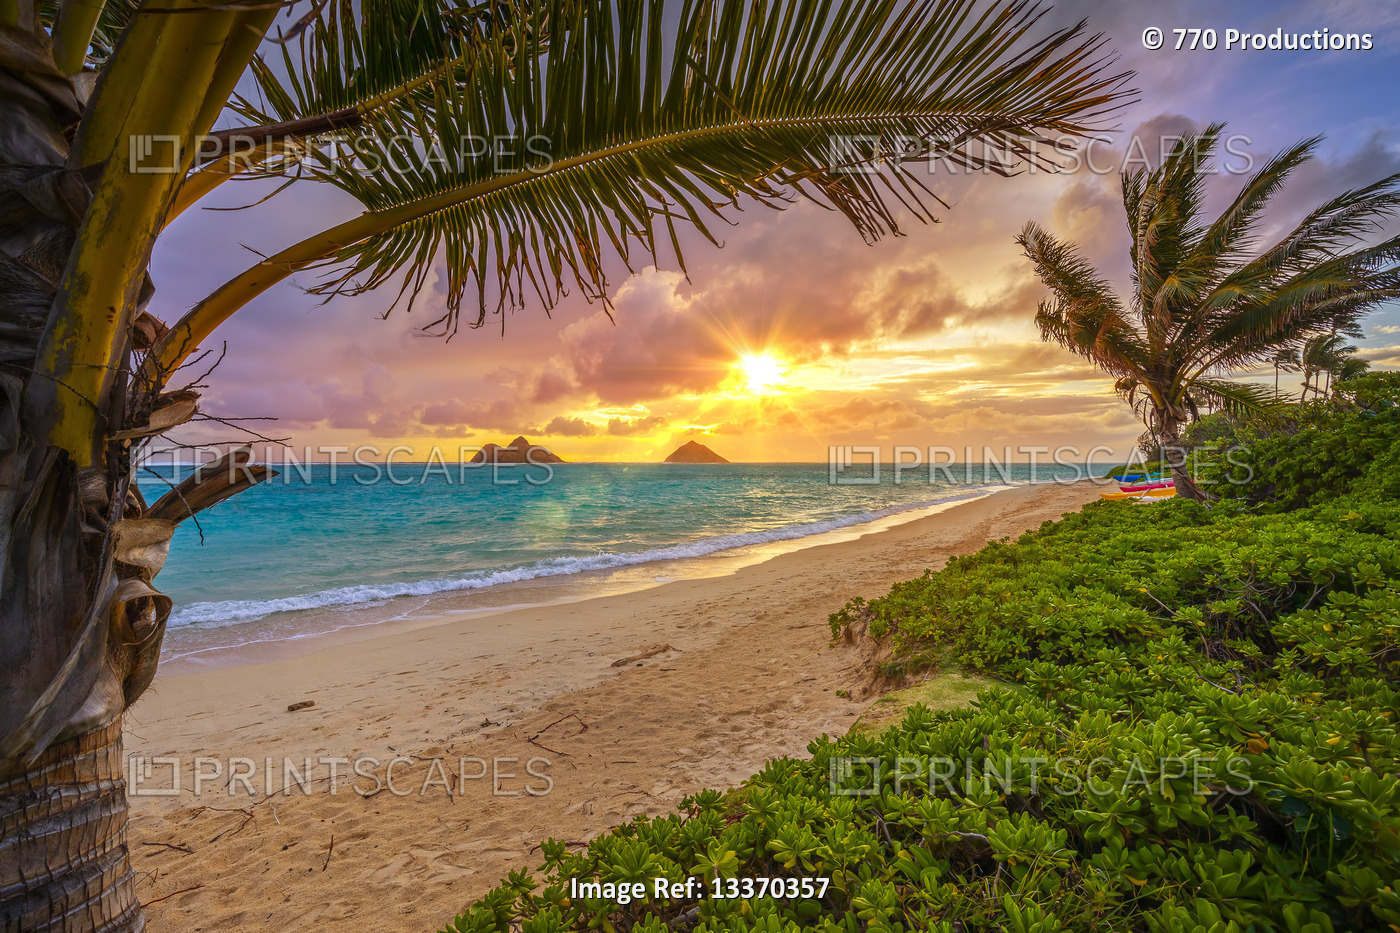 Lanakai Beach at sunrise, with the surf washing up on the golden sand and a ...